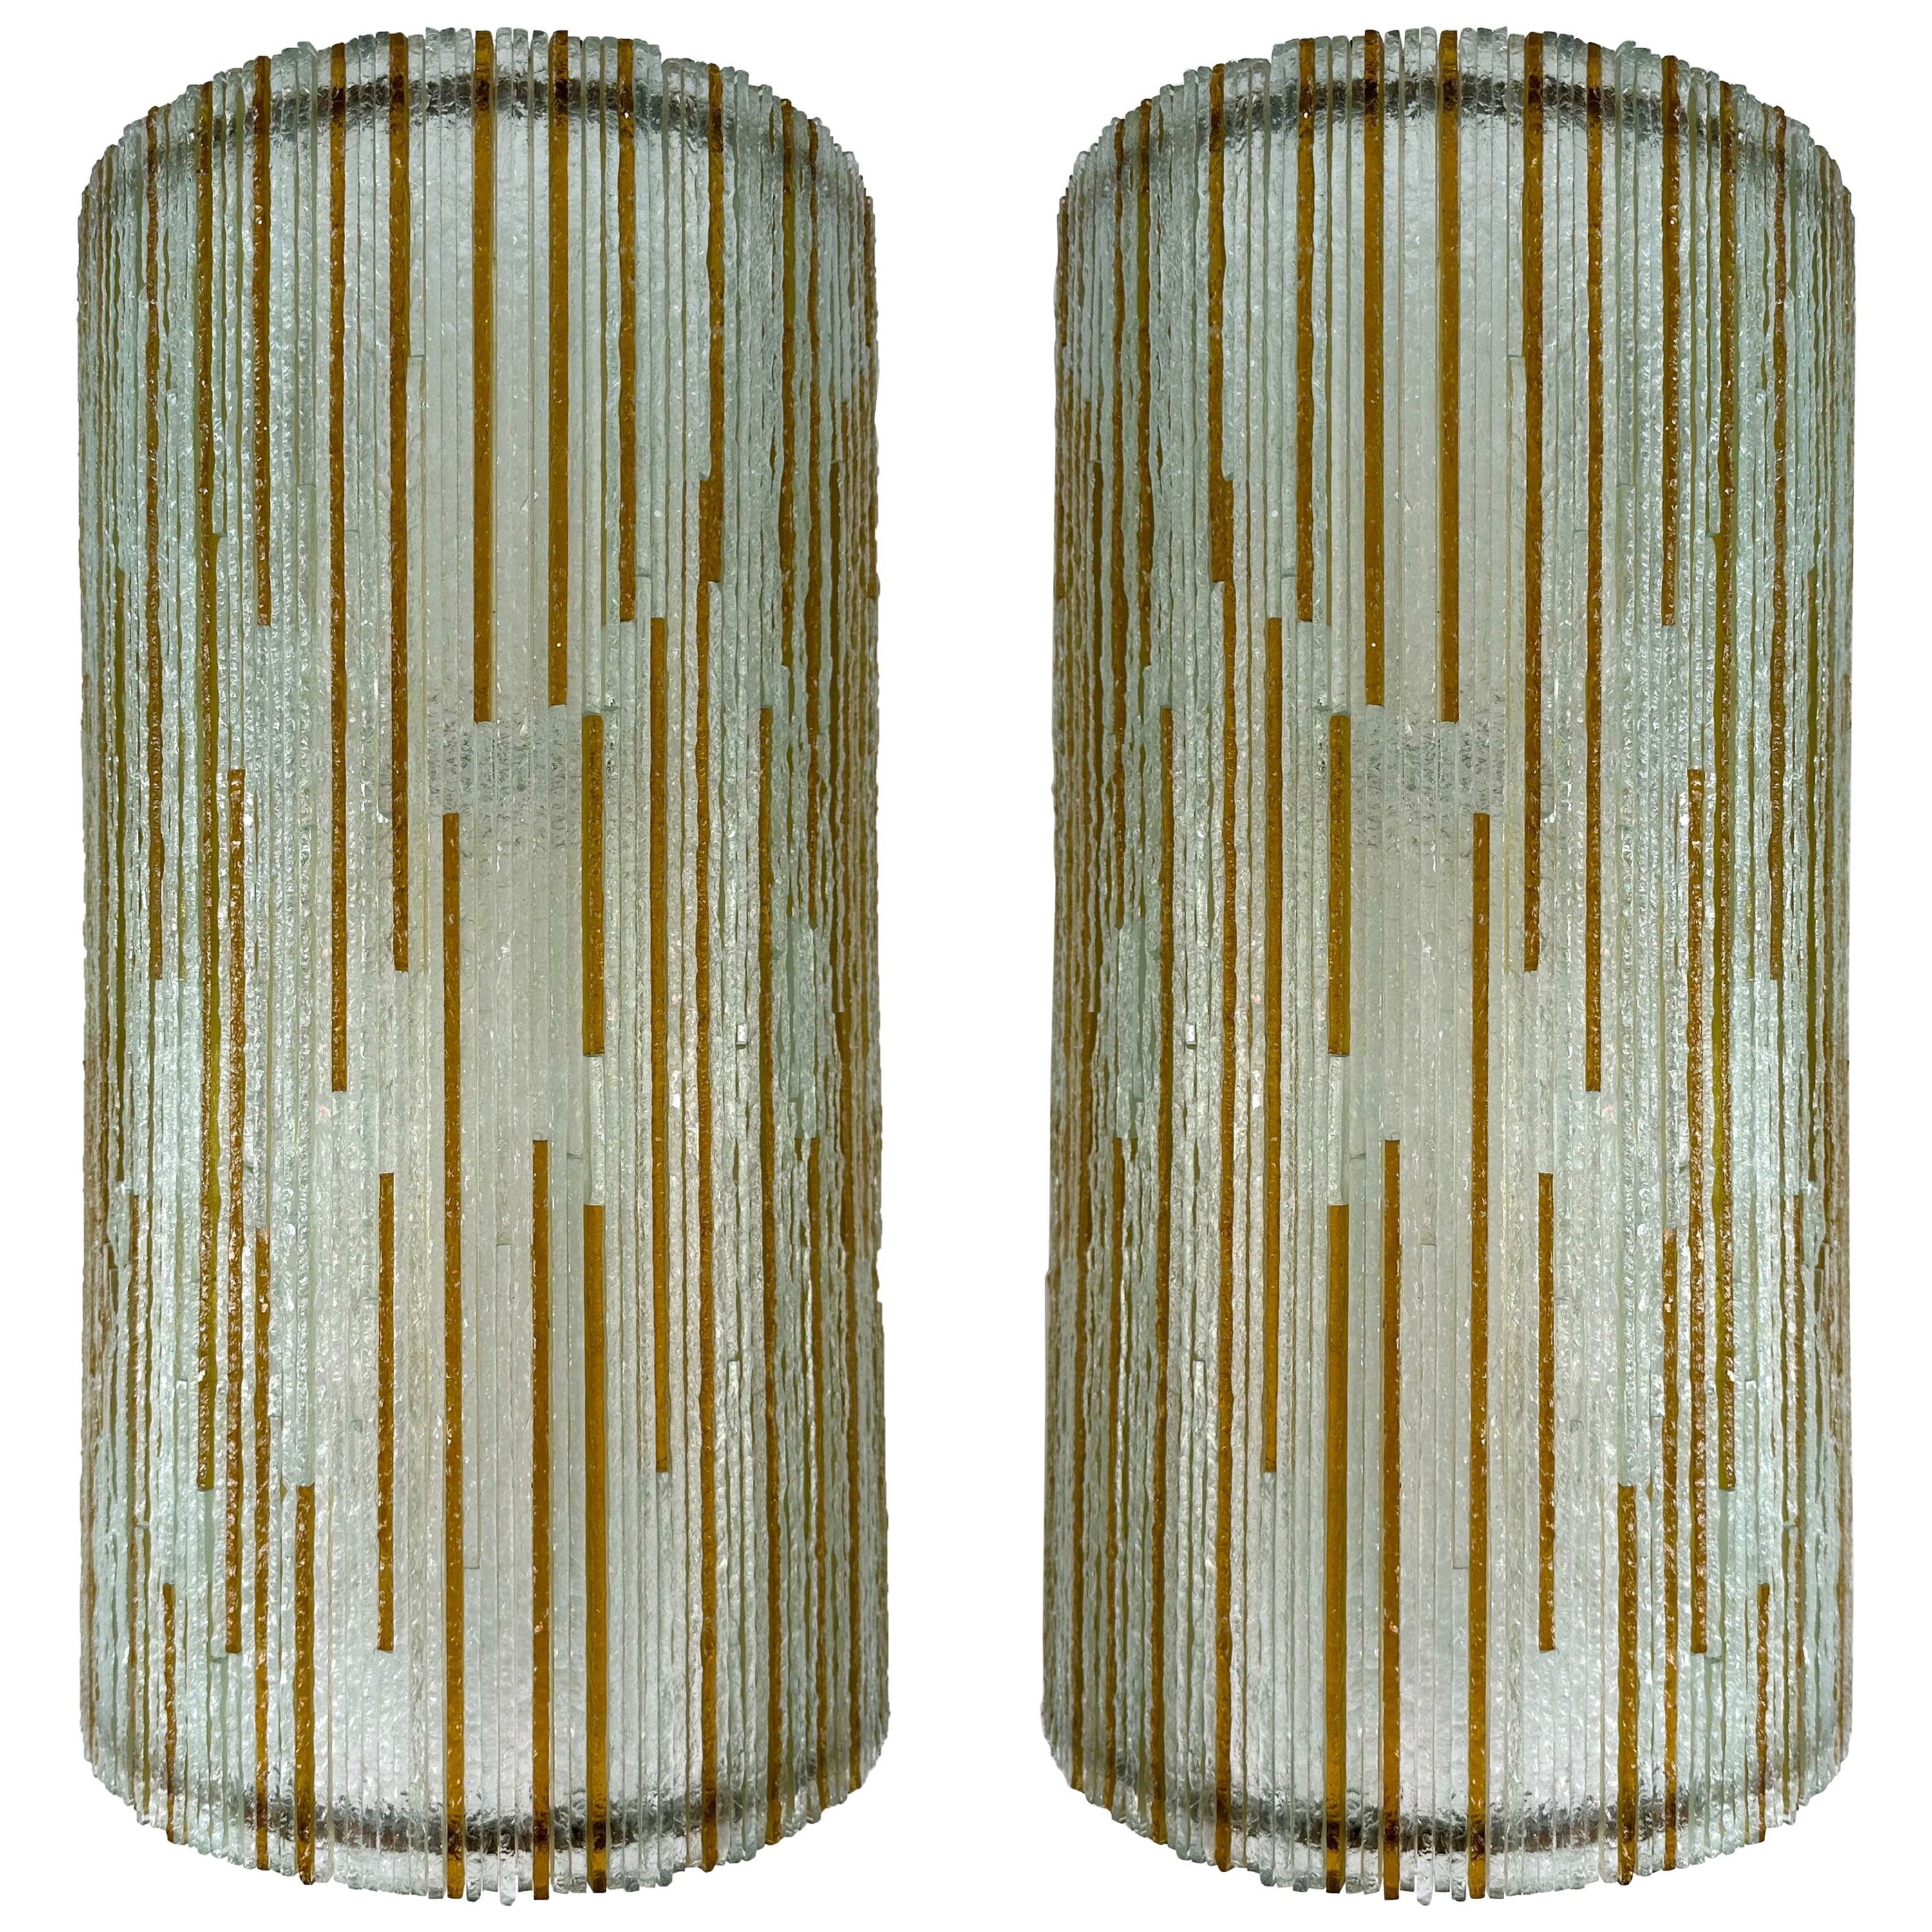 Large Pair of Hammered Amber Glass Ice Sconces by Poliarte, Italy, 1970s